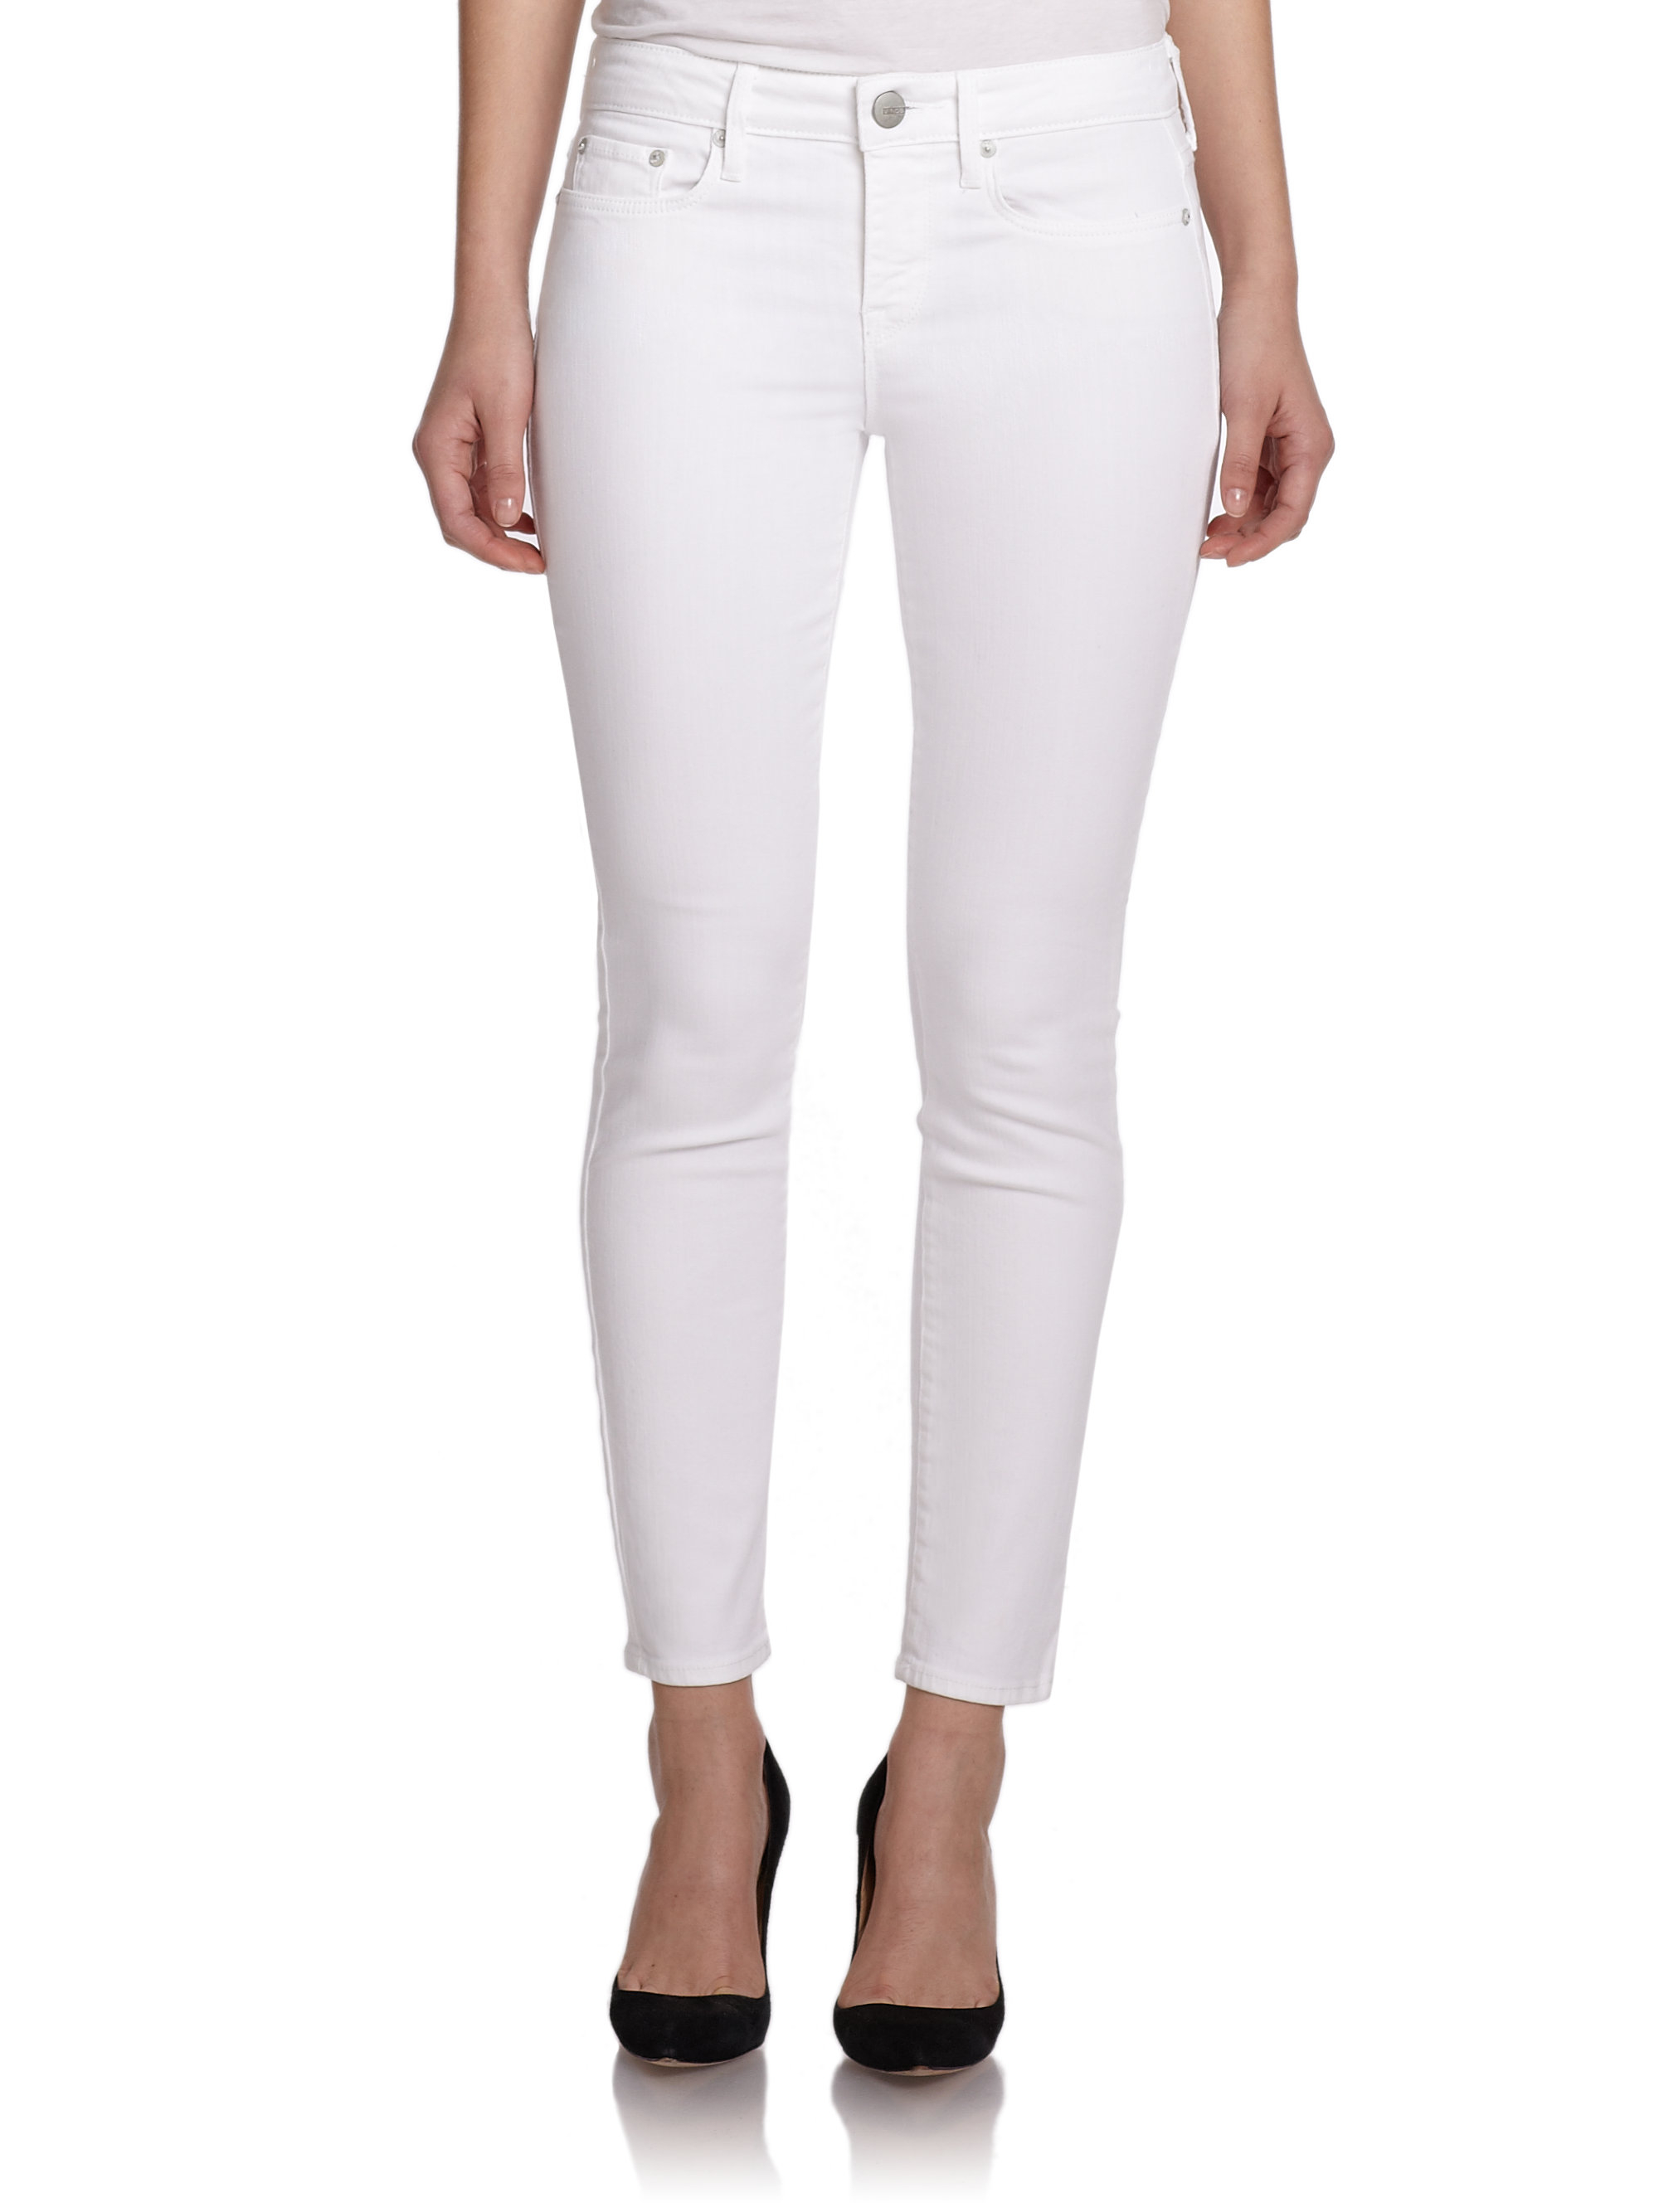 Lyst - Vince Dylan Skinny Jeans in White